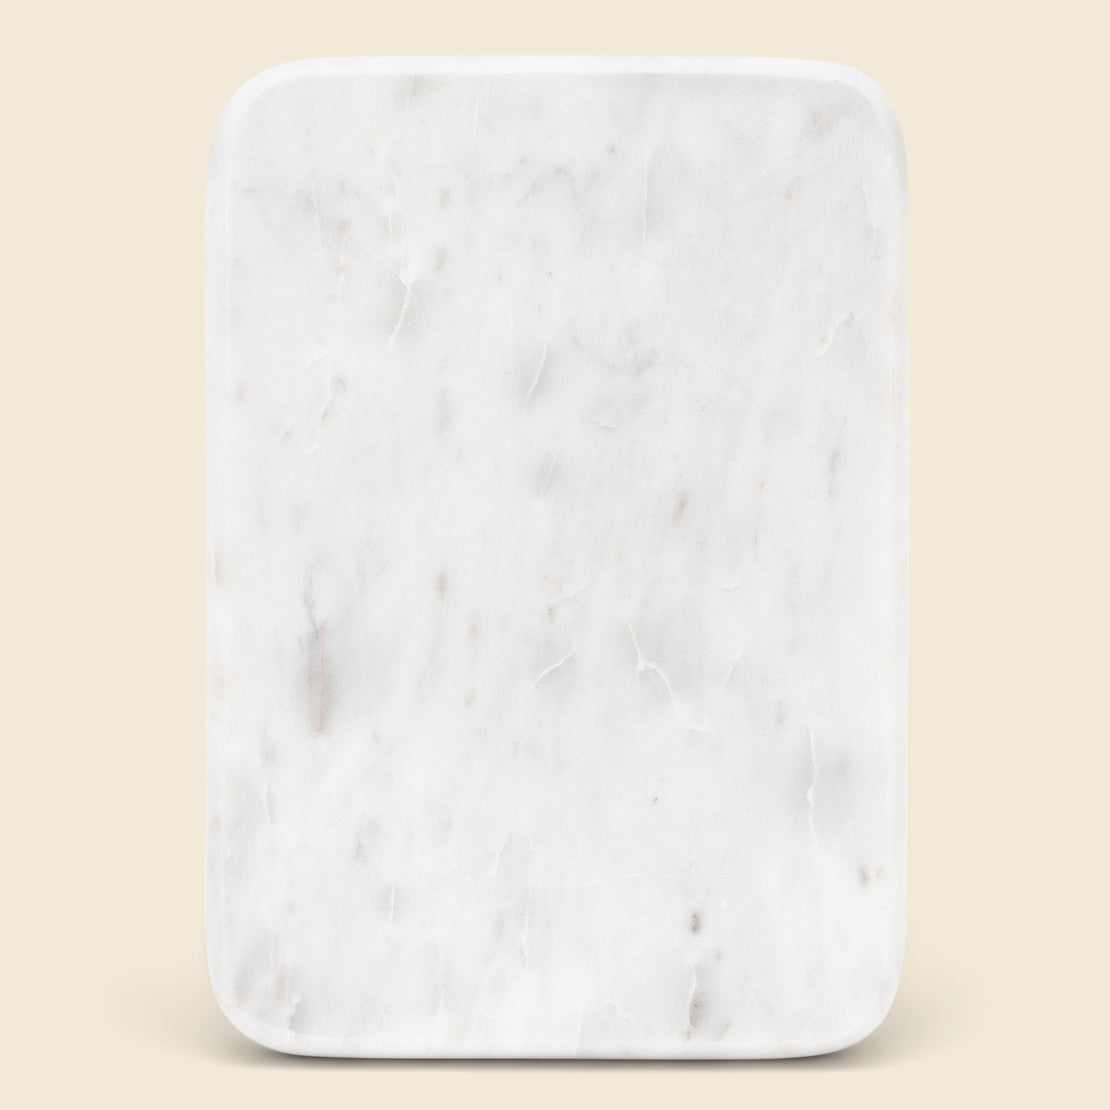 Reversible Marble Cheese Board - Home - STAG Provisions - Home - Kitchen - Tabletop